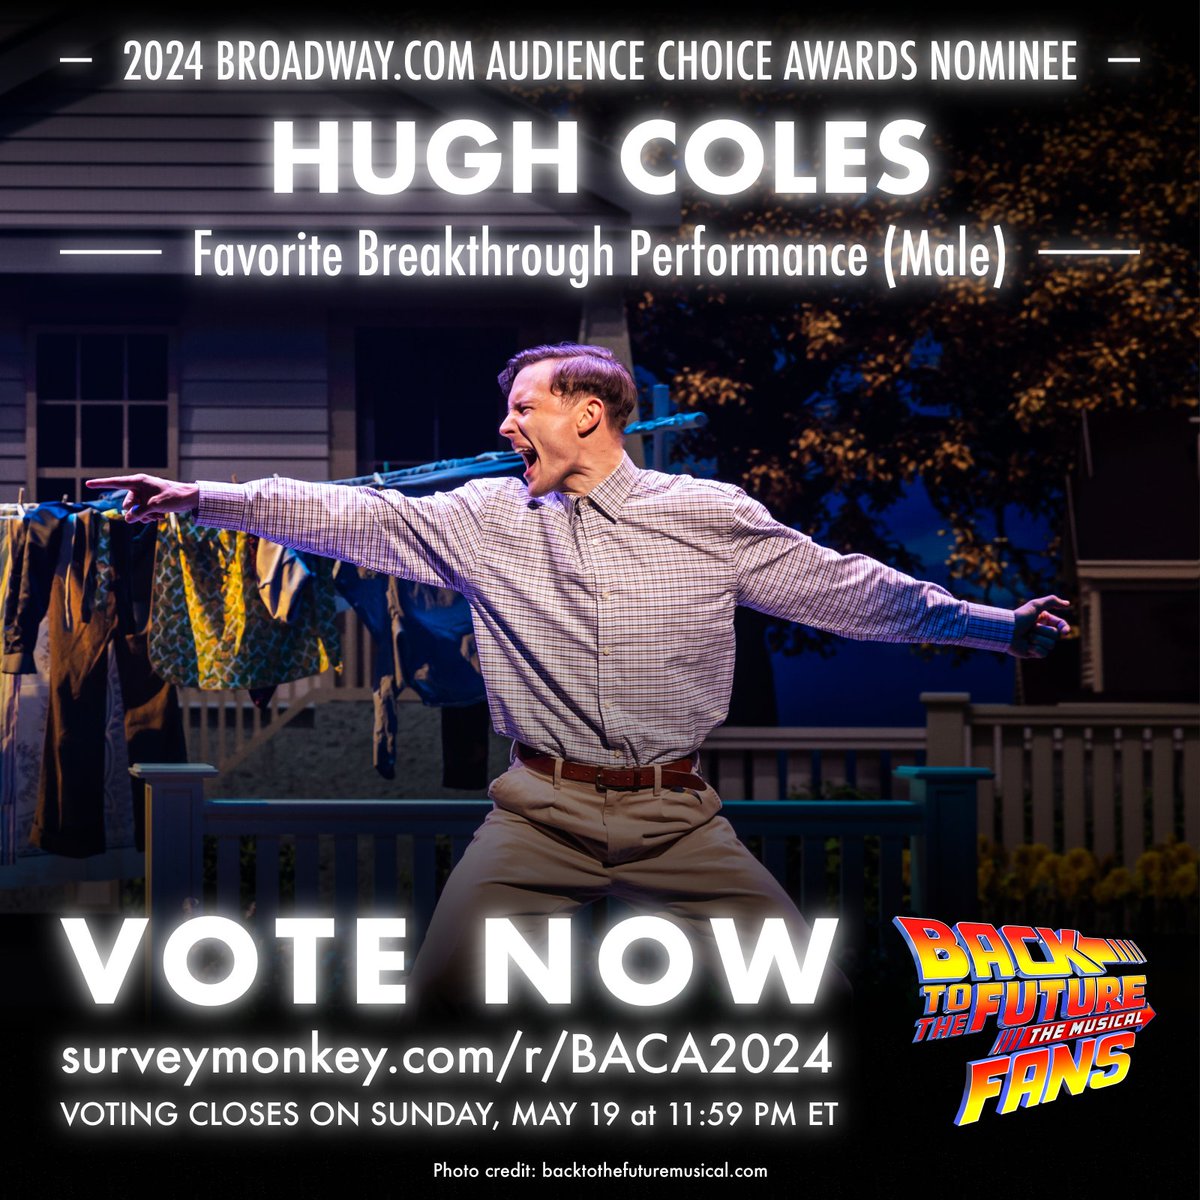 VOTE for @hughcoles to win in the 2024 @broadwaycom Audience Choice Awards for…

⚡️ Favorite Breakthrough Performance (Male)

🗳 surveymonkey.com/r/BACA2024